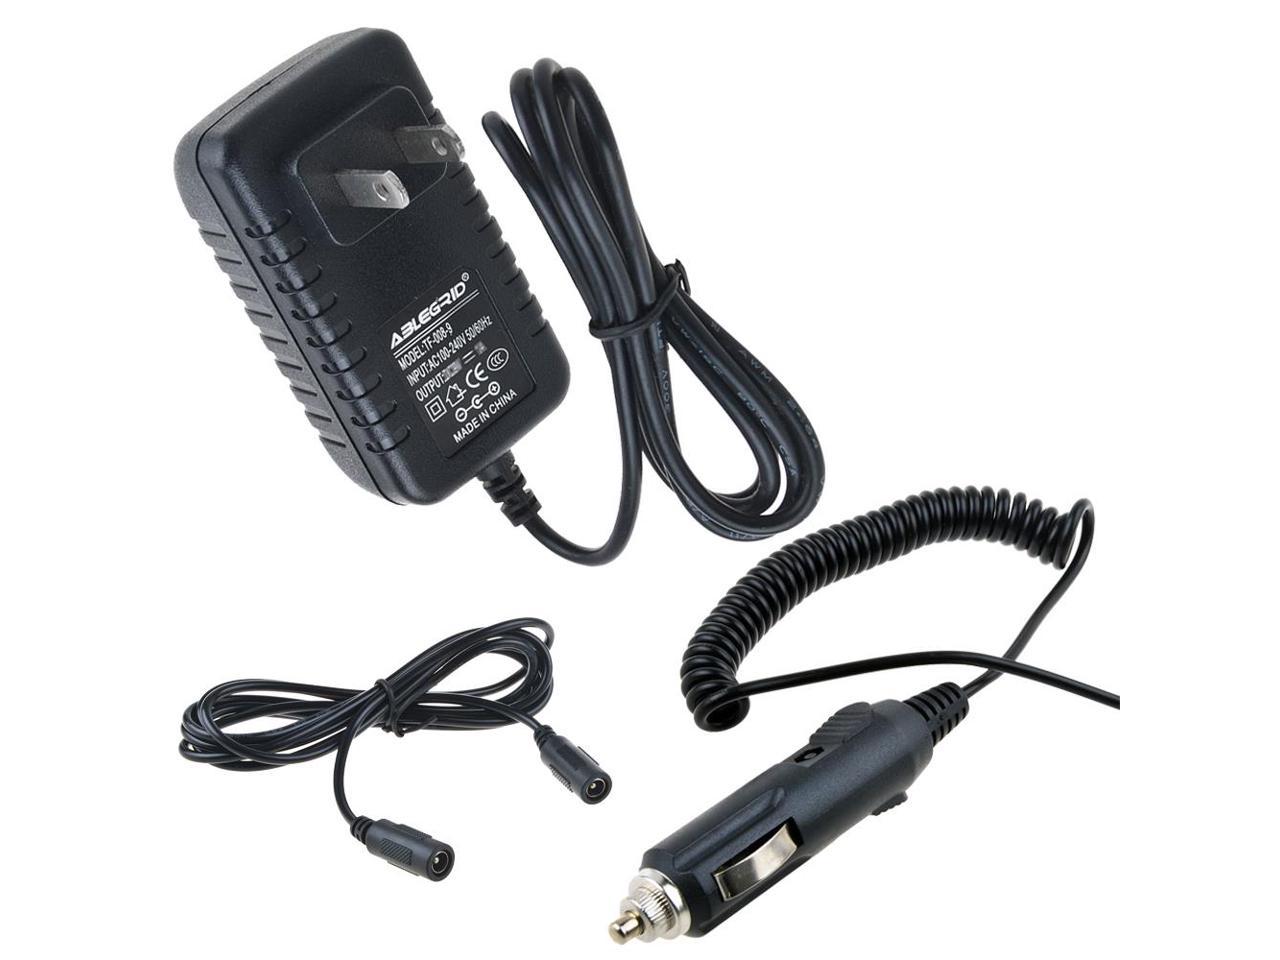 Positive Center Pin 5.5mm*2.5mm 13.8V 3A AC-DC Adapter Power Supply Cord Charger